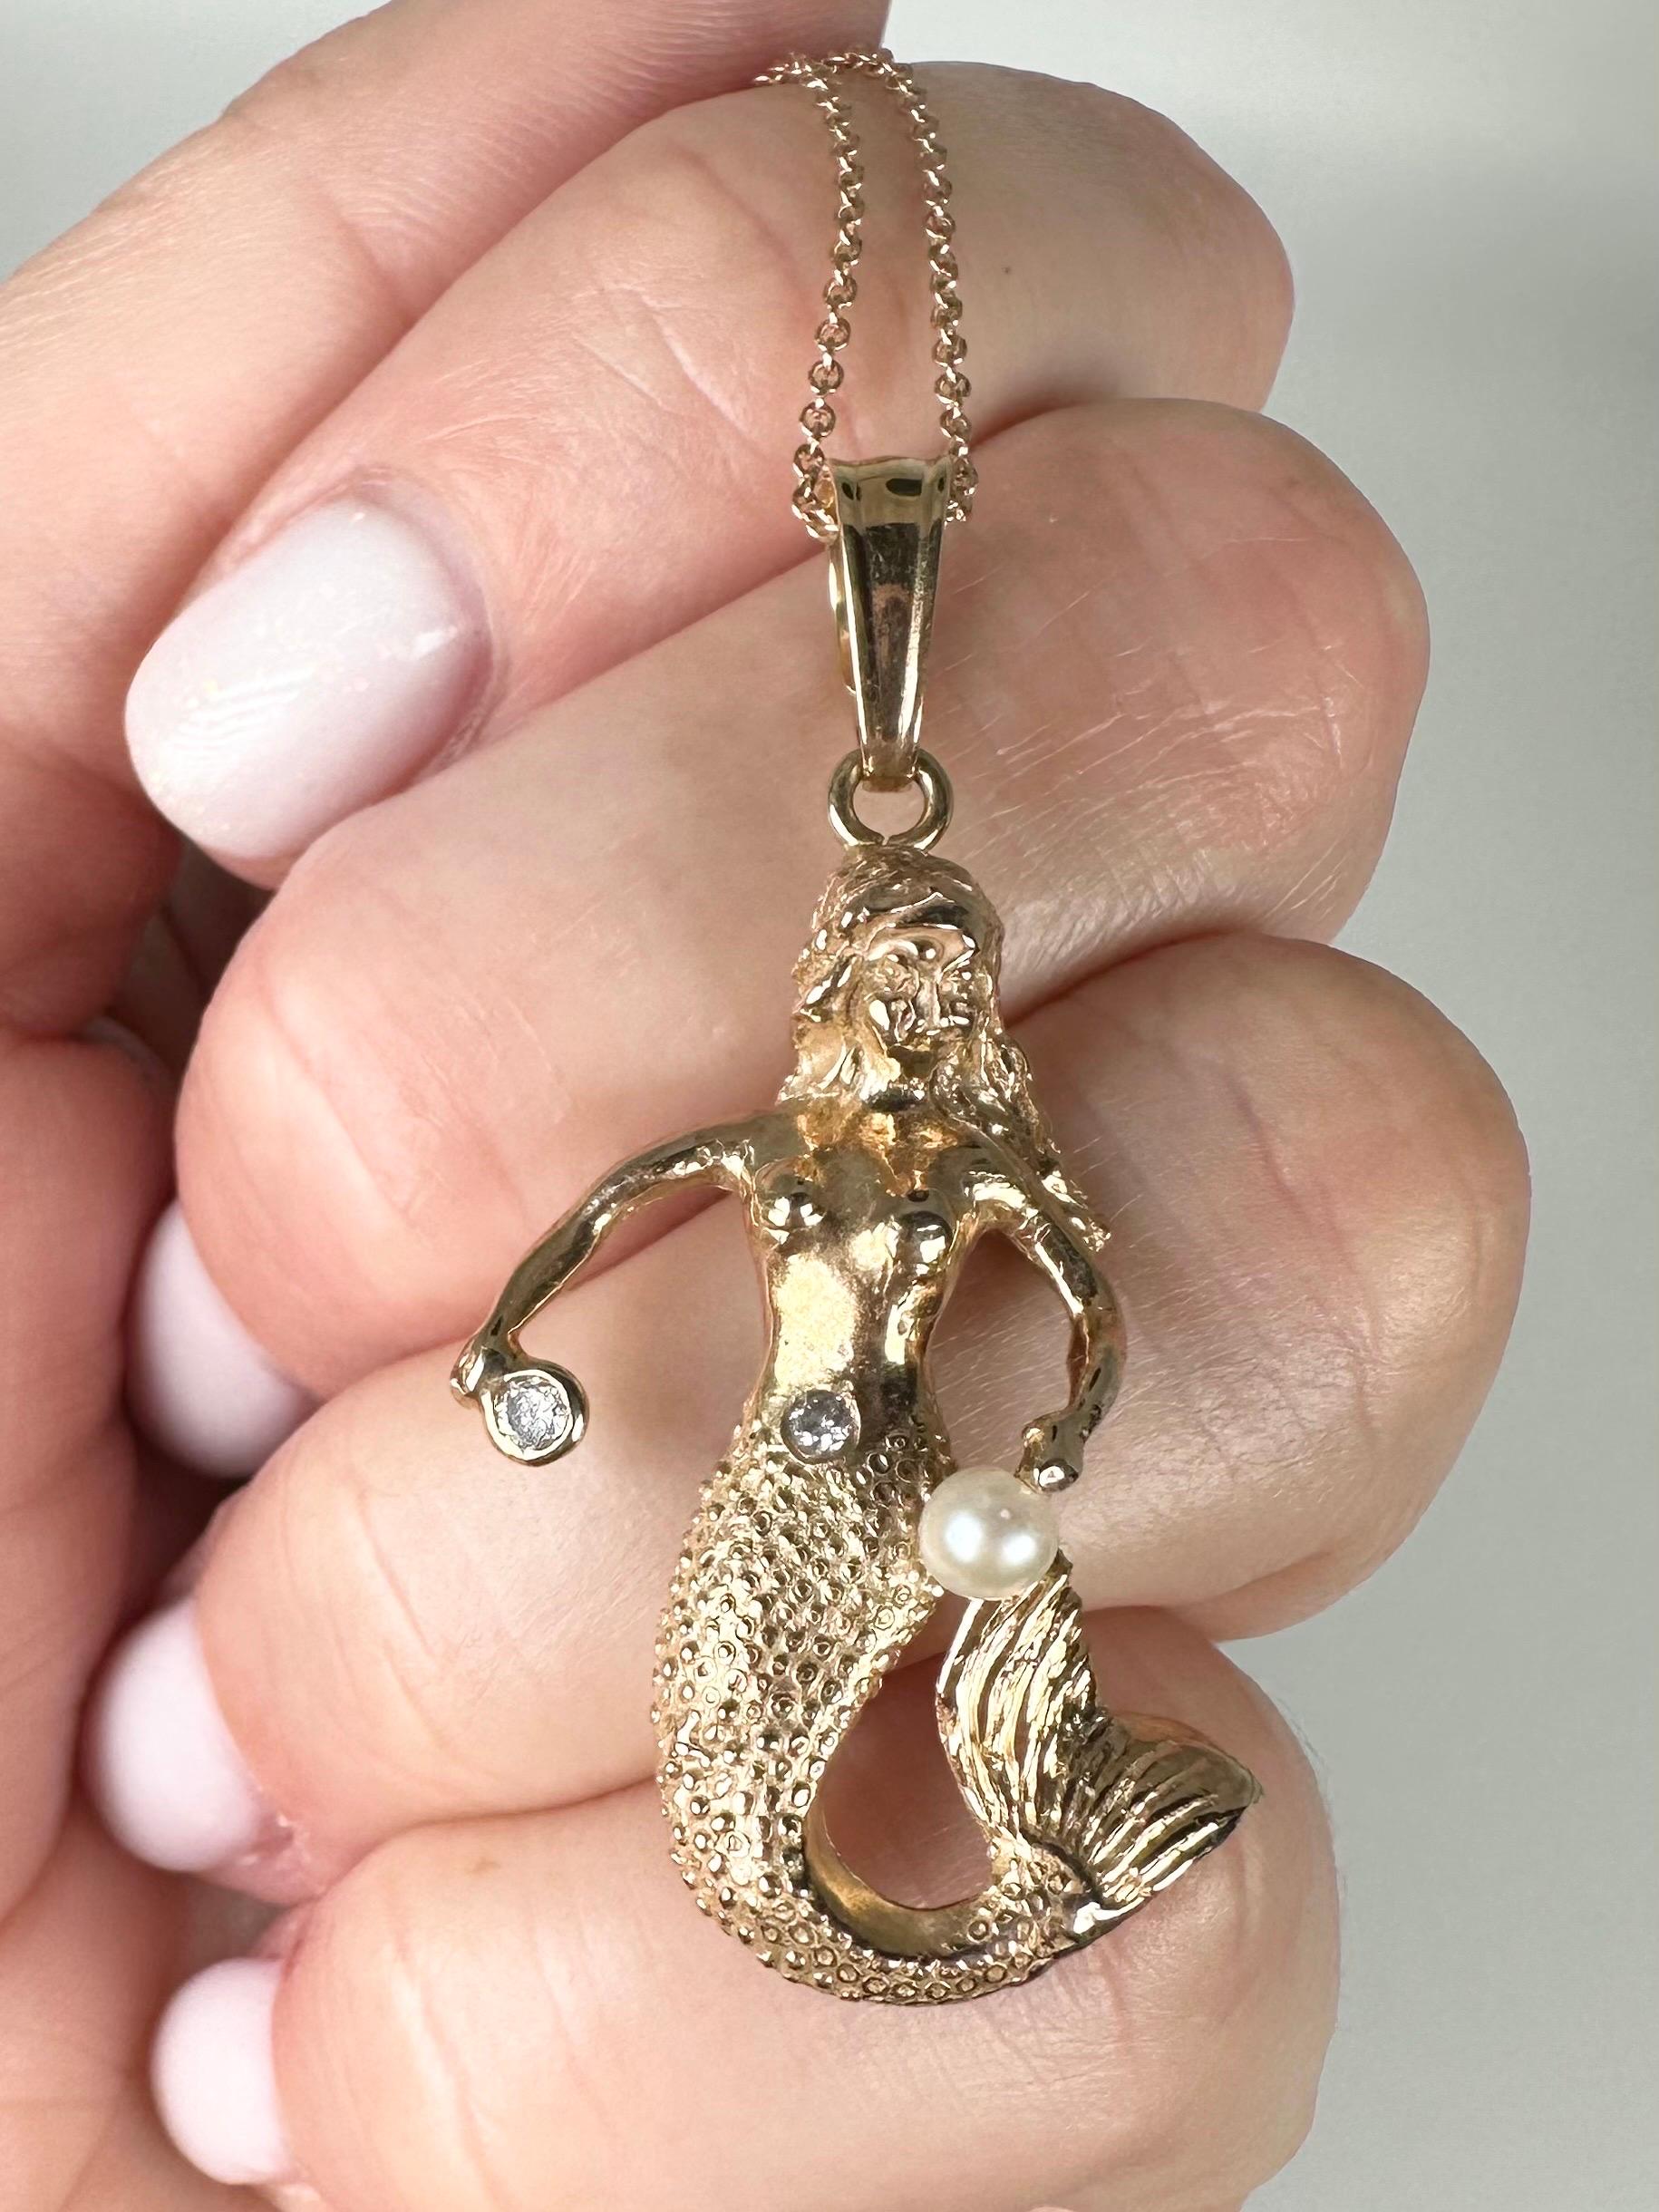 A true sea creation, a mermaid pendant with natural pearl and diamond, hand finished to perfection with lots of small details, amaxzingly crafted in 14KT yellow gold!

GOLD: 14KT gold
NATURAL DIAMOND(S)
Clarity/Color: VS/G
Carat:0.10ct
Cut:Round